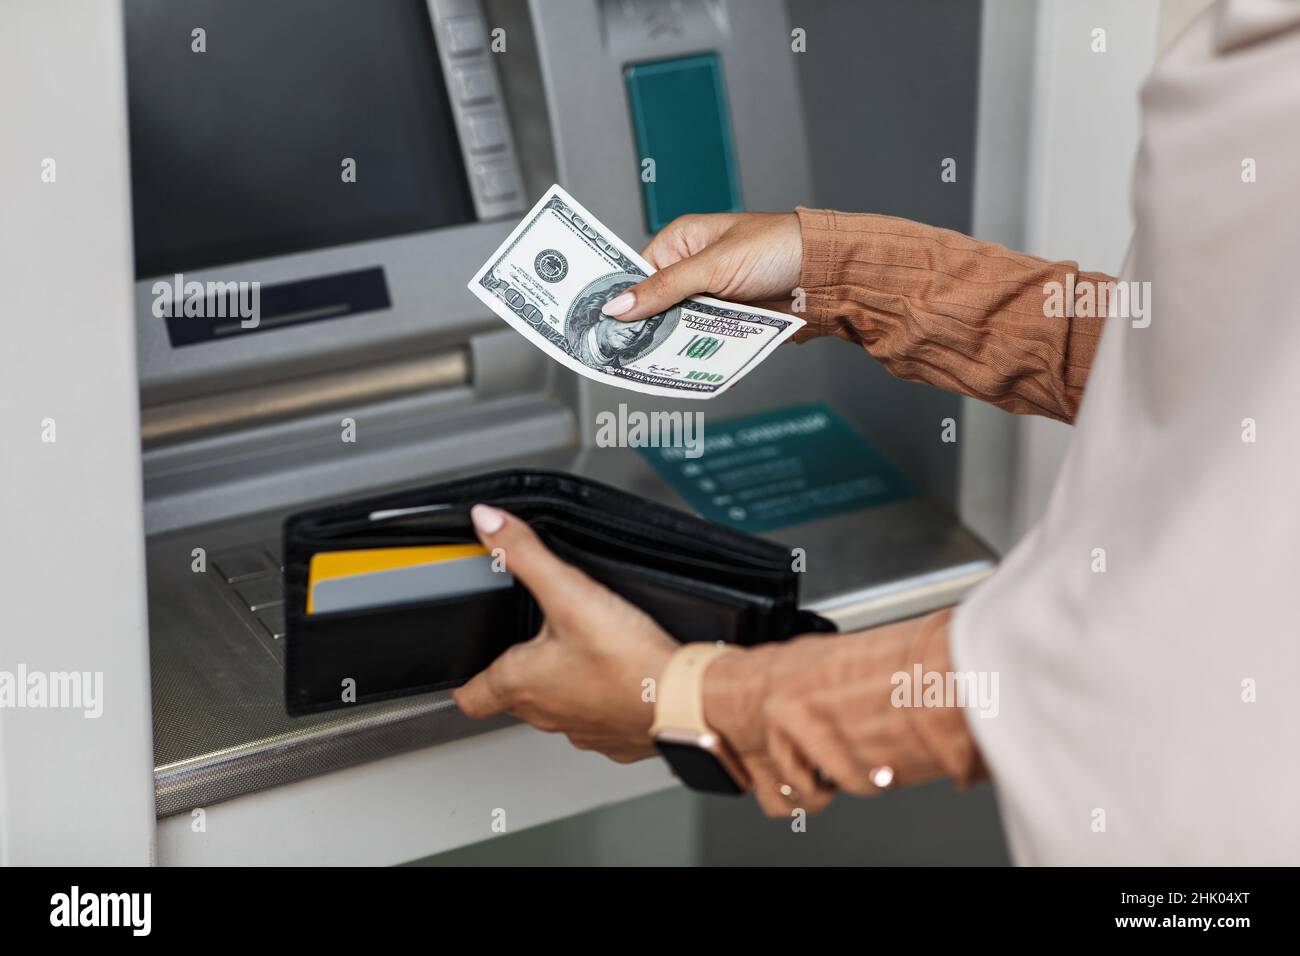 Withdraw money, transfer funds, pay financial bills, transactions, banking and people Stock Photo